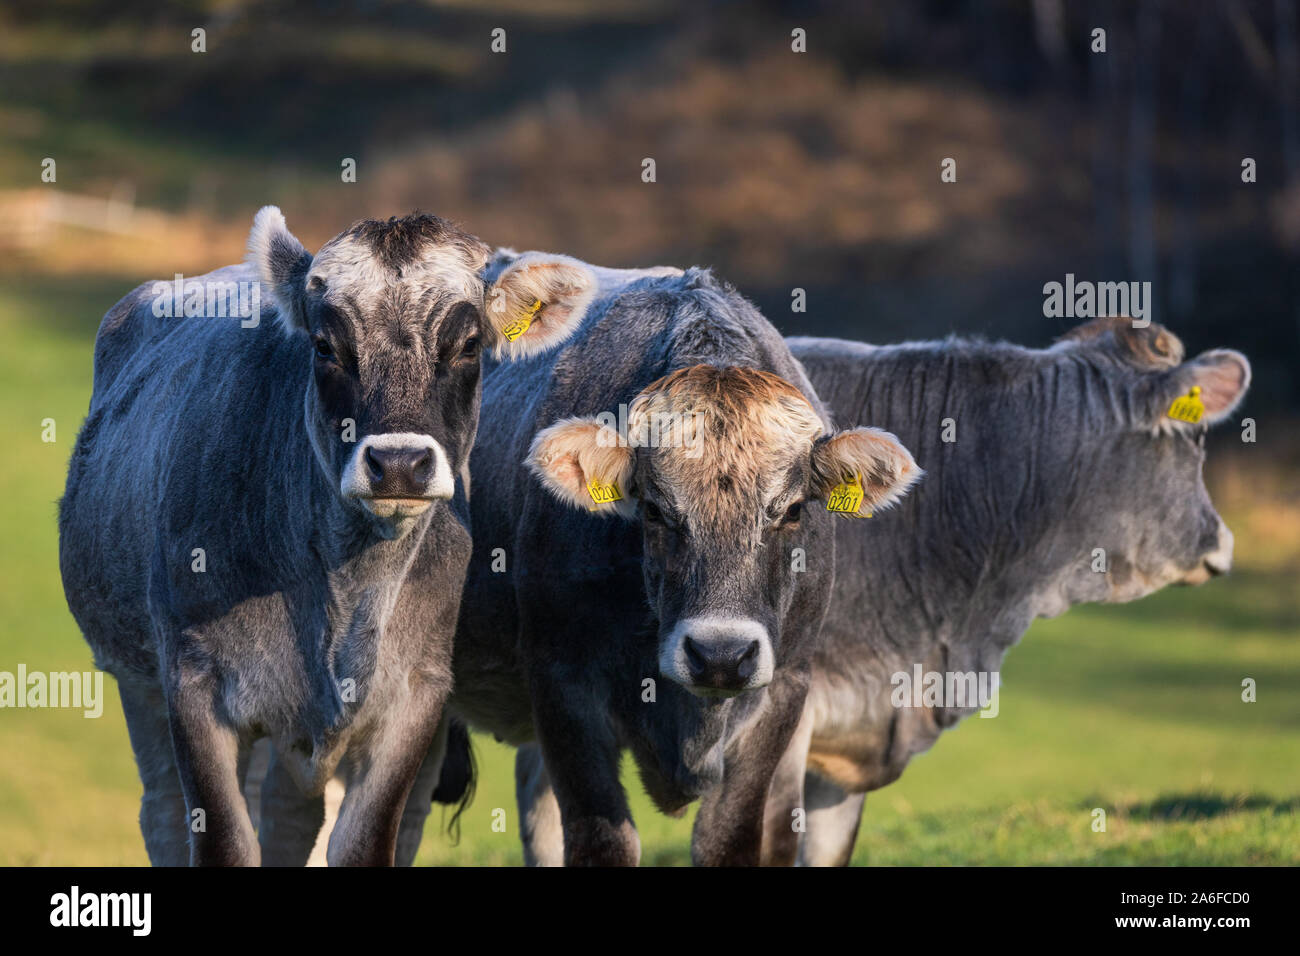 Cattle are commonly raised as livestock for meat and for milk. Happy Animals Produce Better Food. Stock Photo